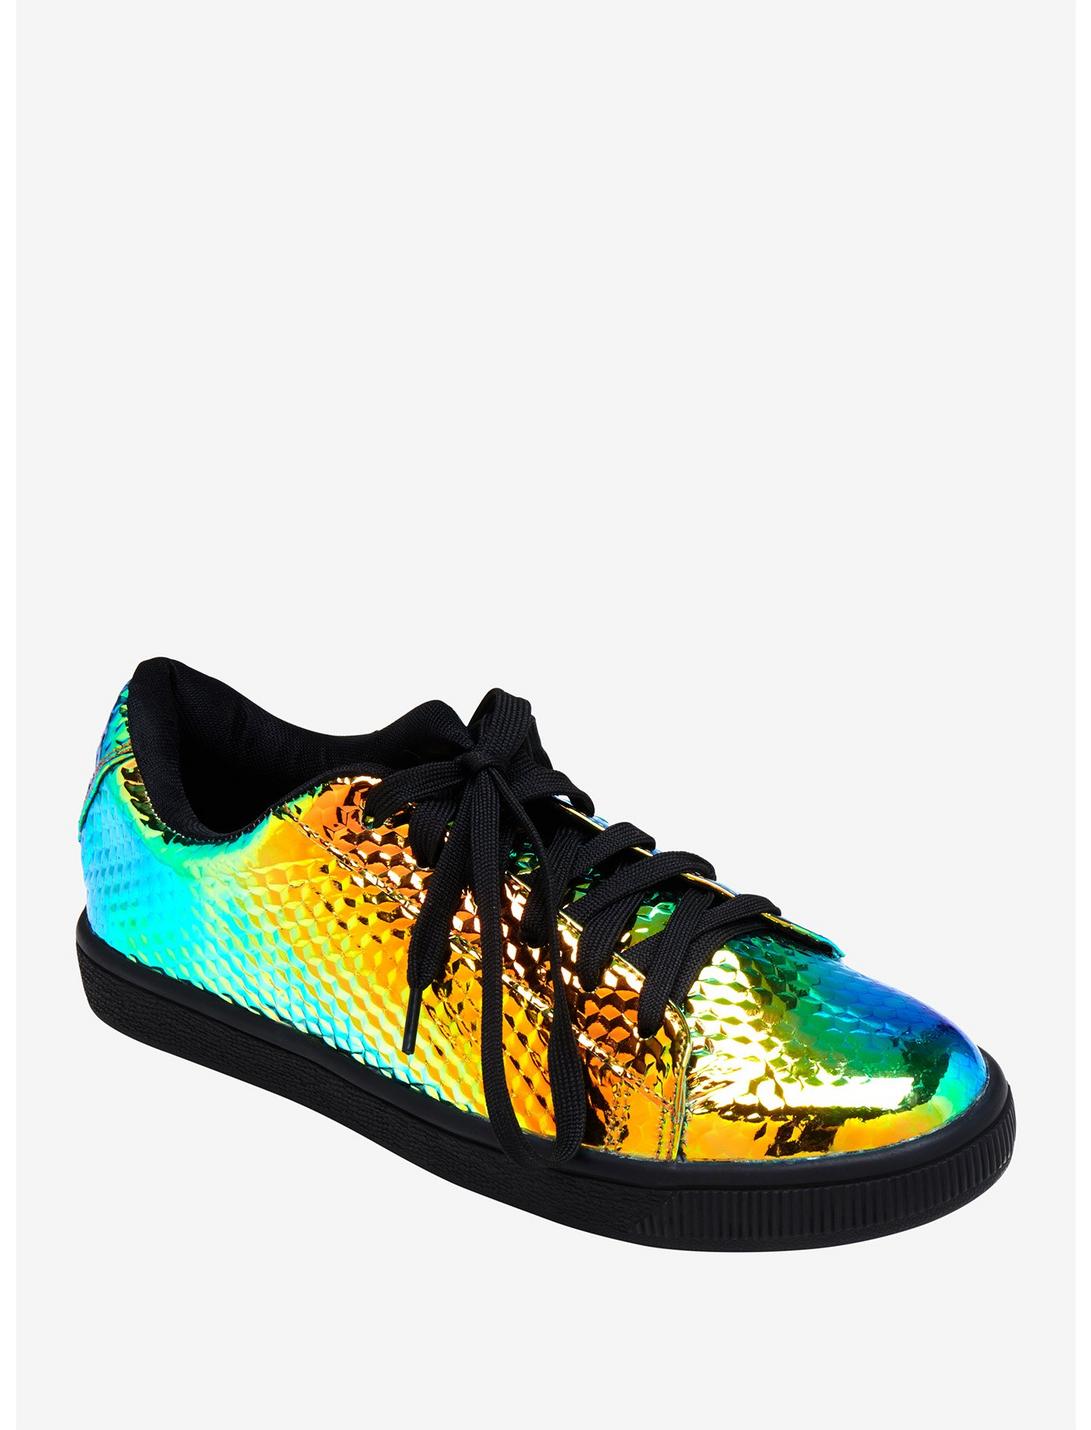 Oil Slick Textured Lace-Up Sneakers, MULTI, hi-res